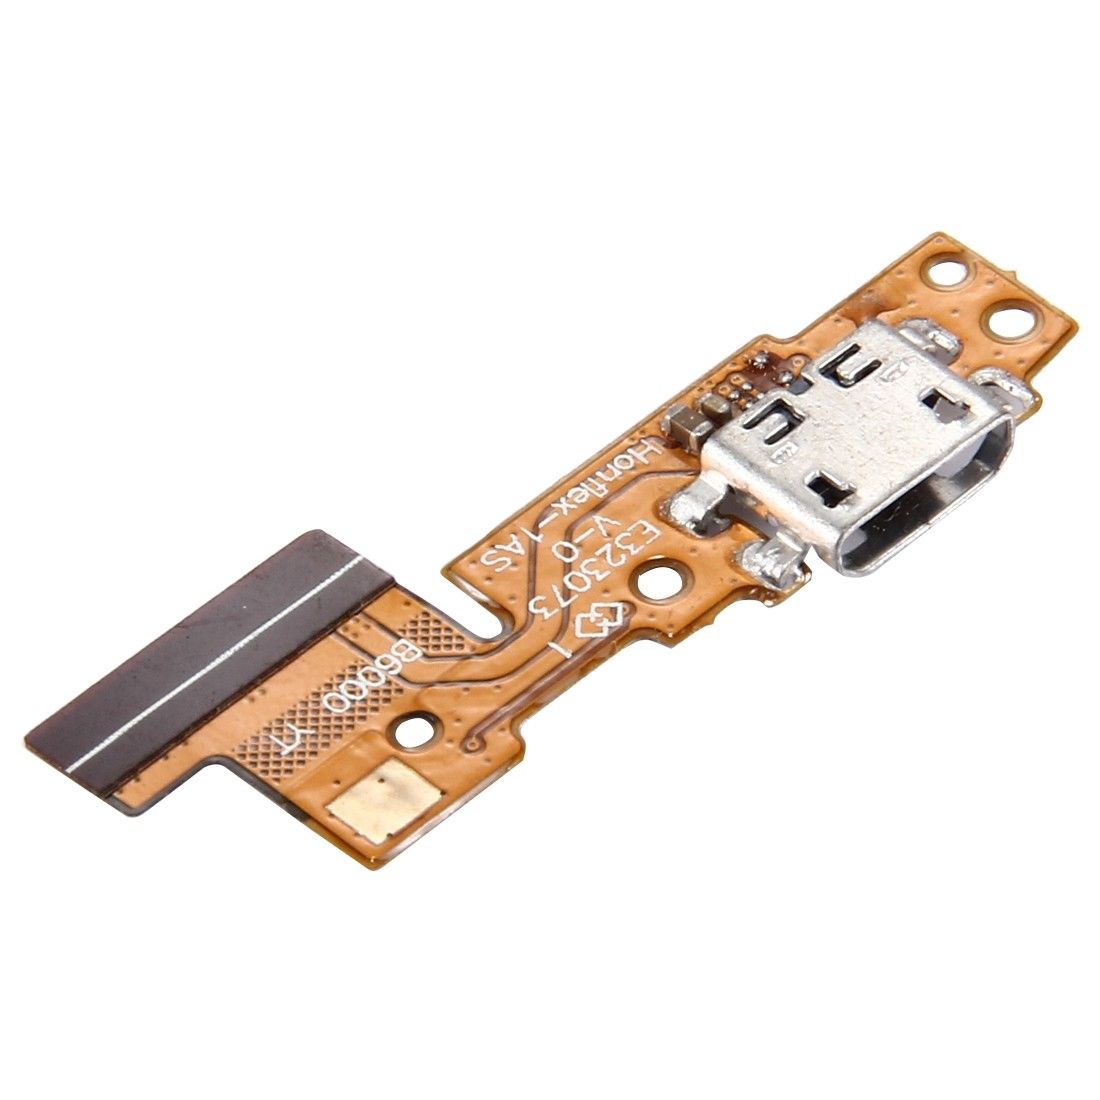 Lenovo Yoga 8 B6000 Charging Port - Blade 8 for [product_price] - First Help Tech